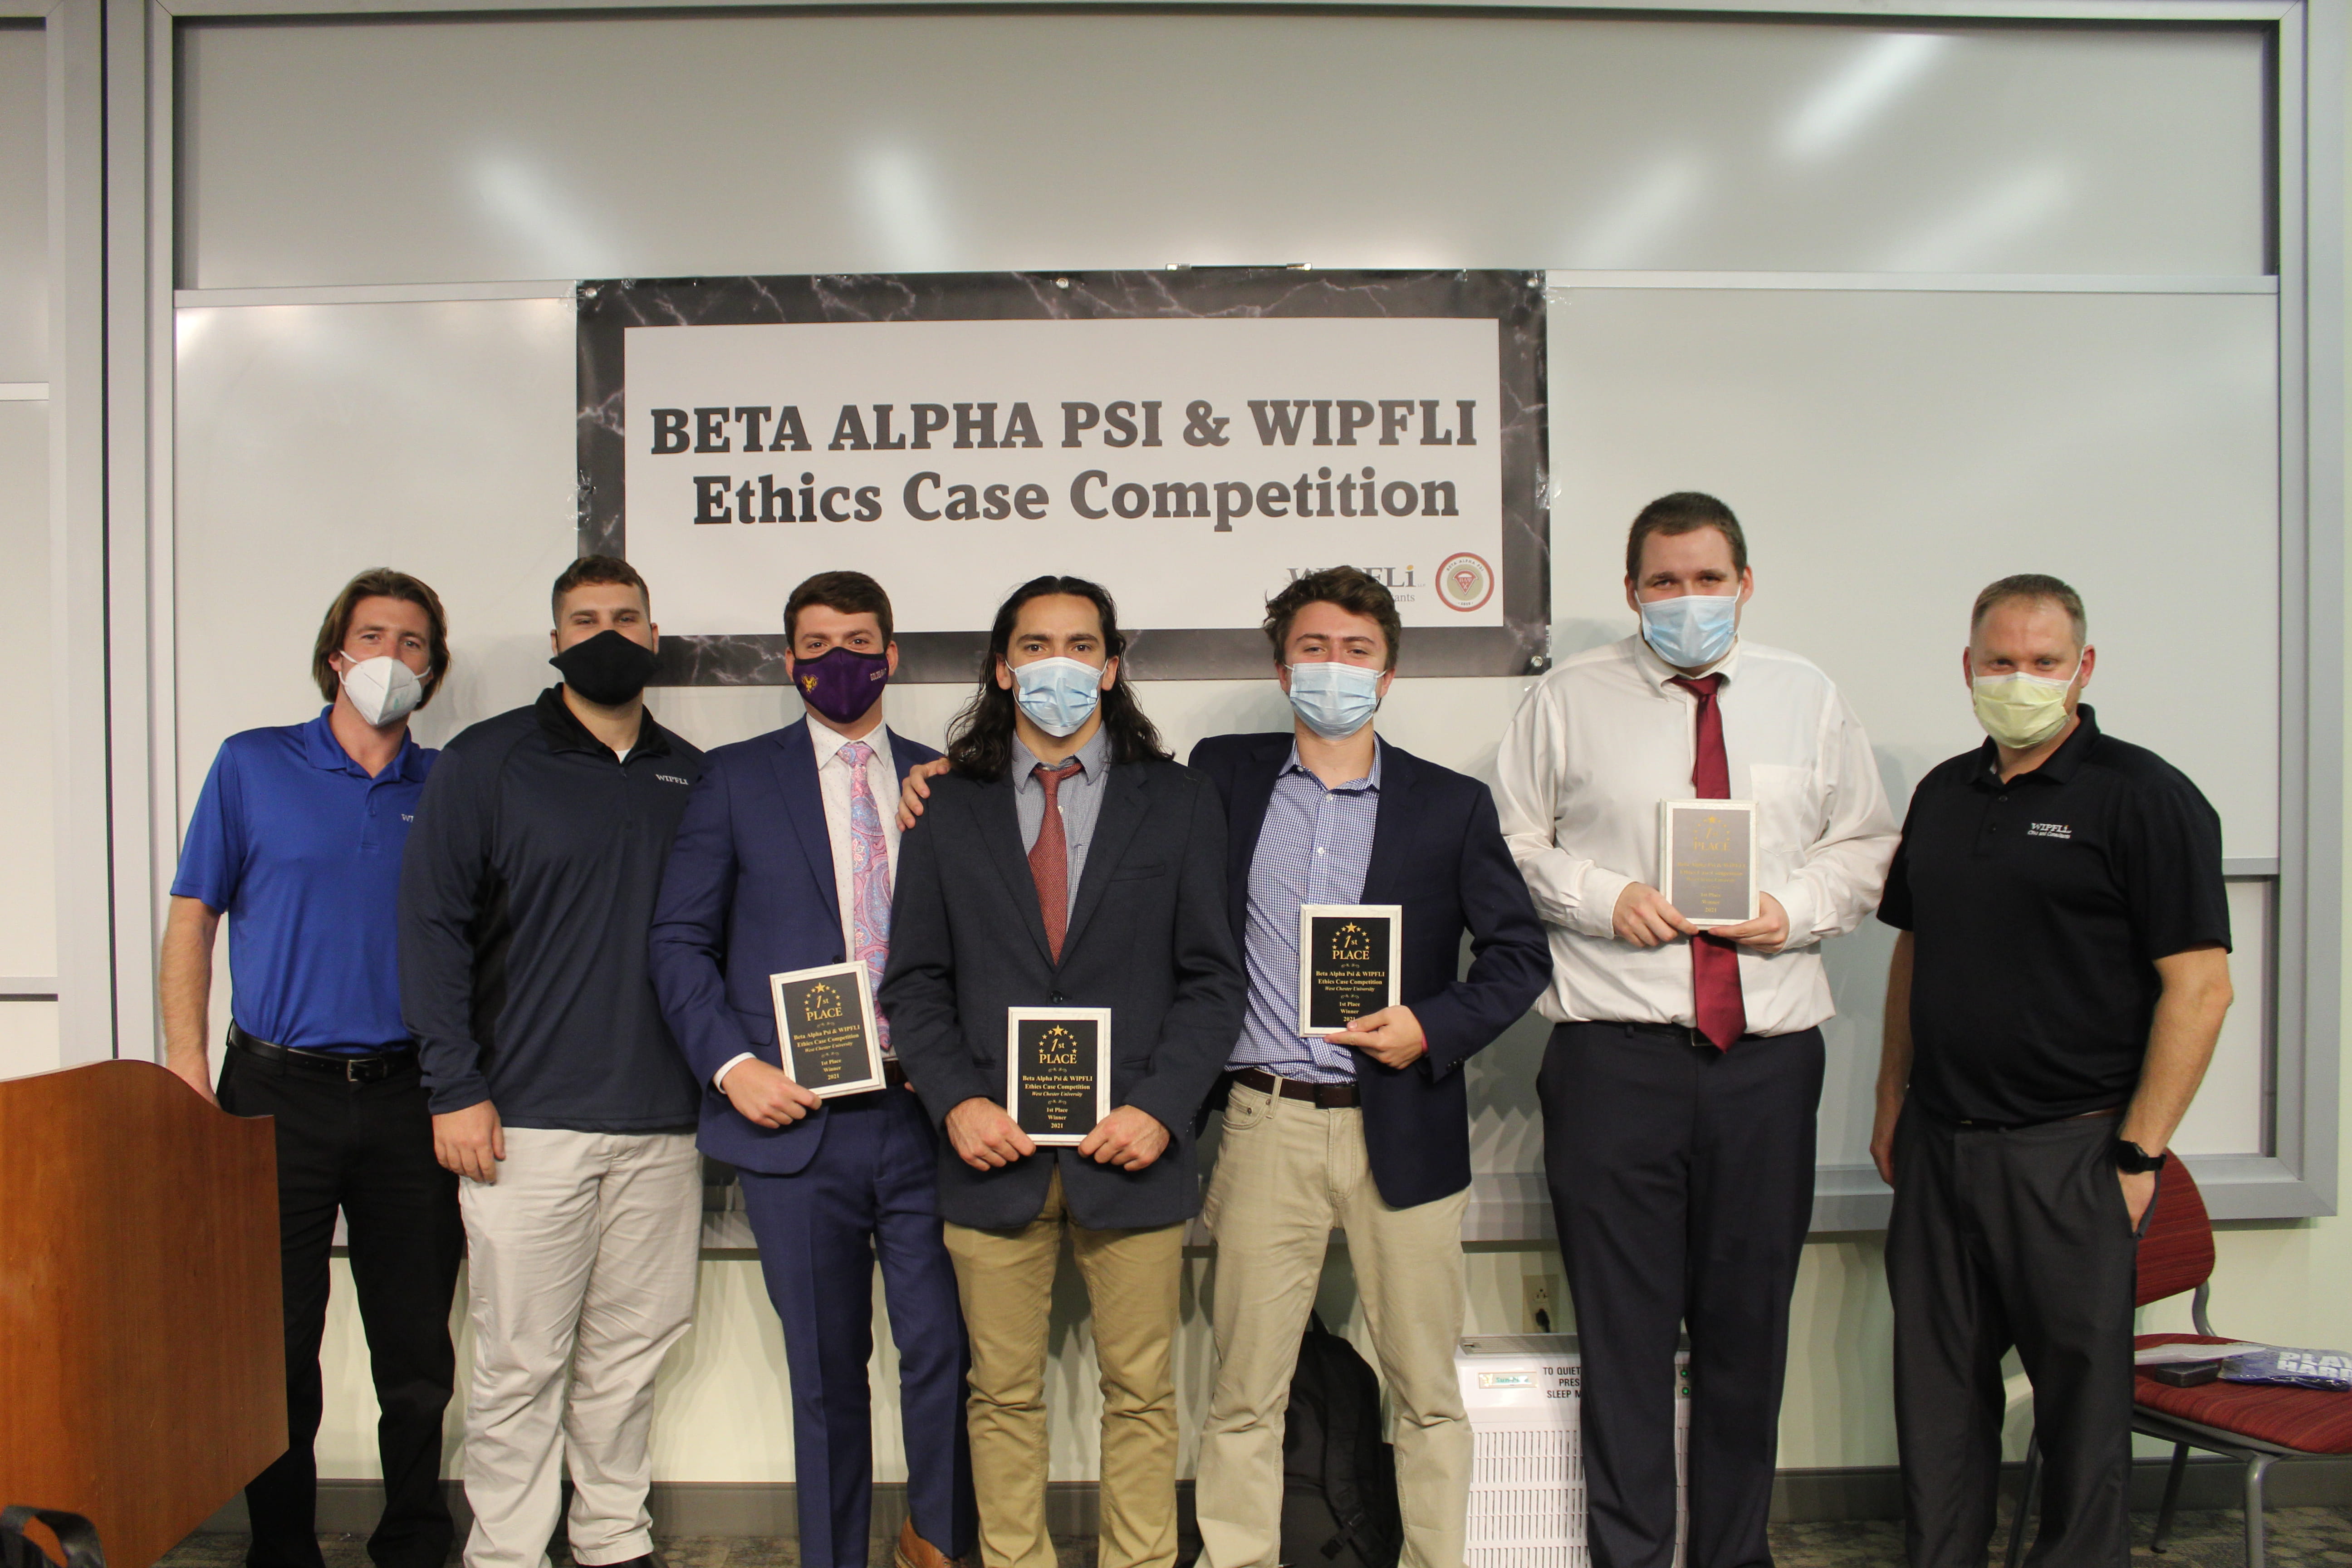 West Chester’s Finest, the other winning team with judges. From left, Wipfli’s Mike Rice and Mark Funk, competitors Brendan Keane, Nick D'Angelo, Nate Frankel, Daniel Gauntlett and judge Kevin Paul.